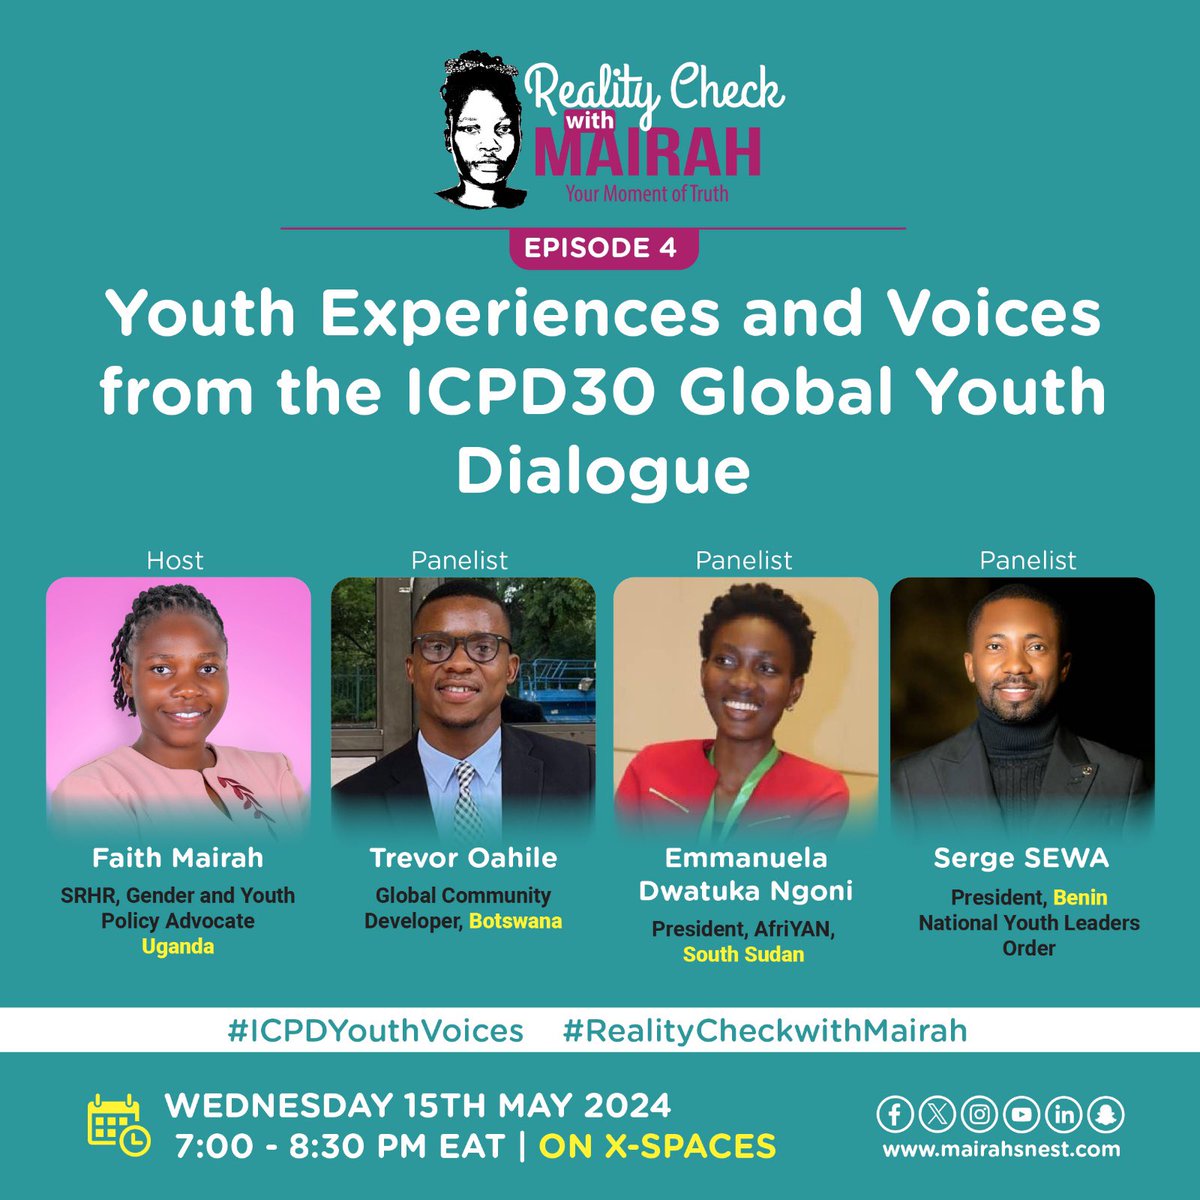 Did you miss the #ICPD30 Global Youth Dialogue in Cotonou, Benin? Are you curious about what happened there? Wonder no more, on our next #RealityCheckwithMairah episode you will get to listen from young leaders who attended in person share their experiences and how they are